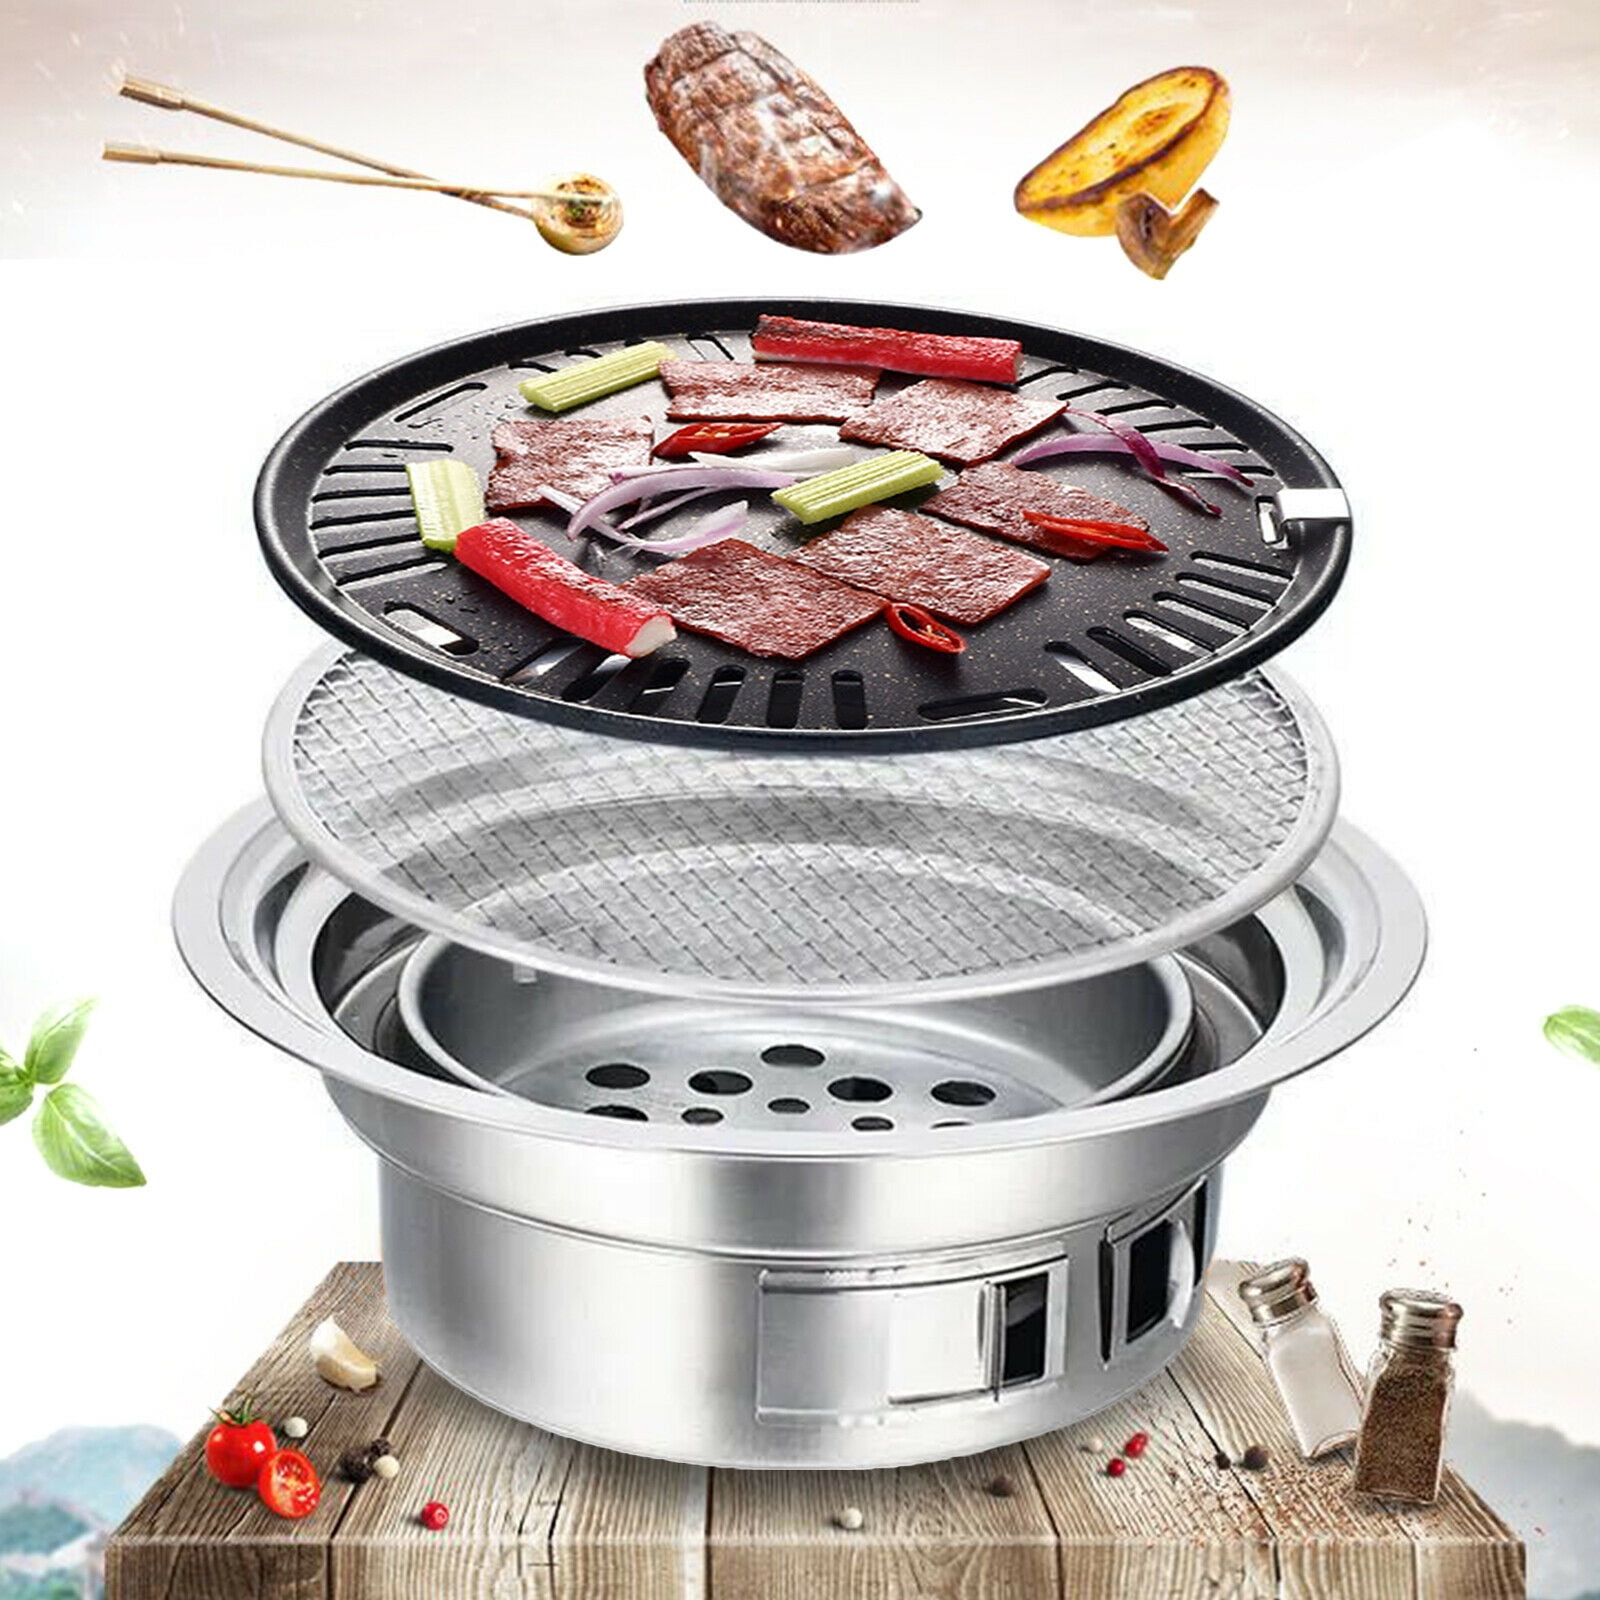 Stainless Steel 4 Burner Gas BBQ Grill Outdoor Home Camp Picnic Roast  Smokeless